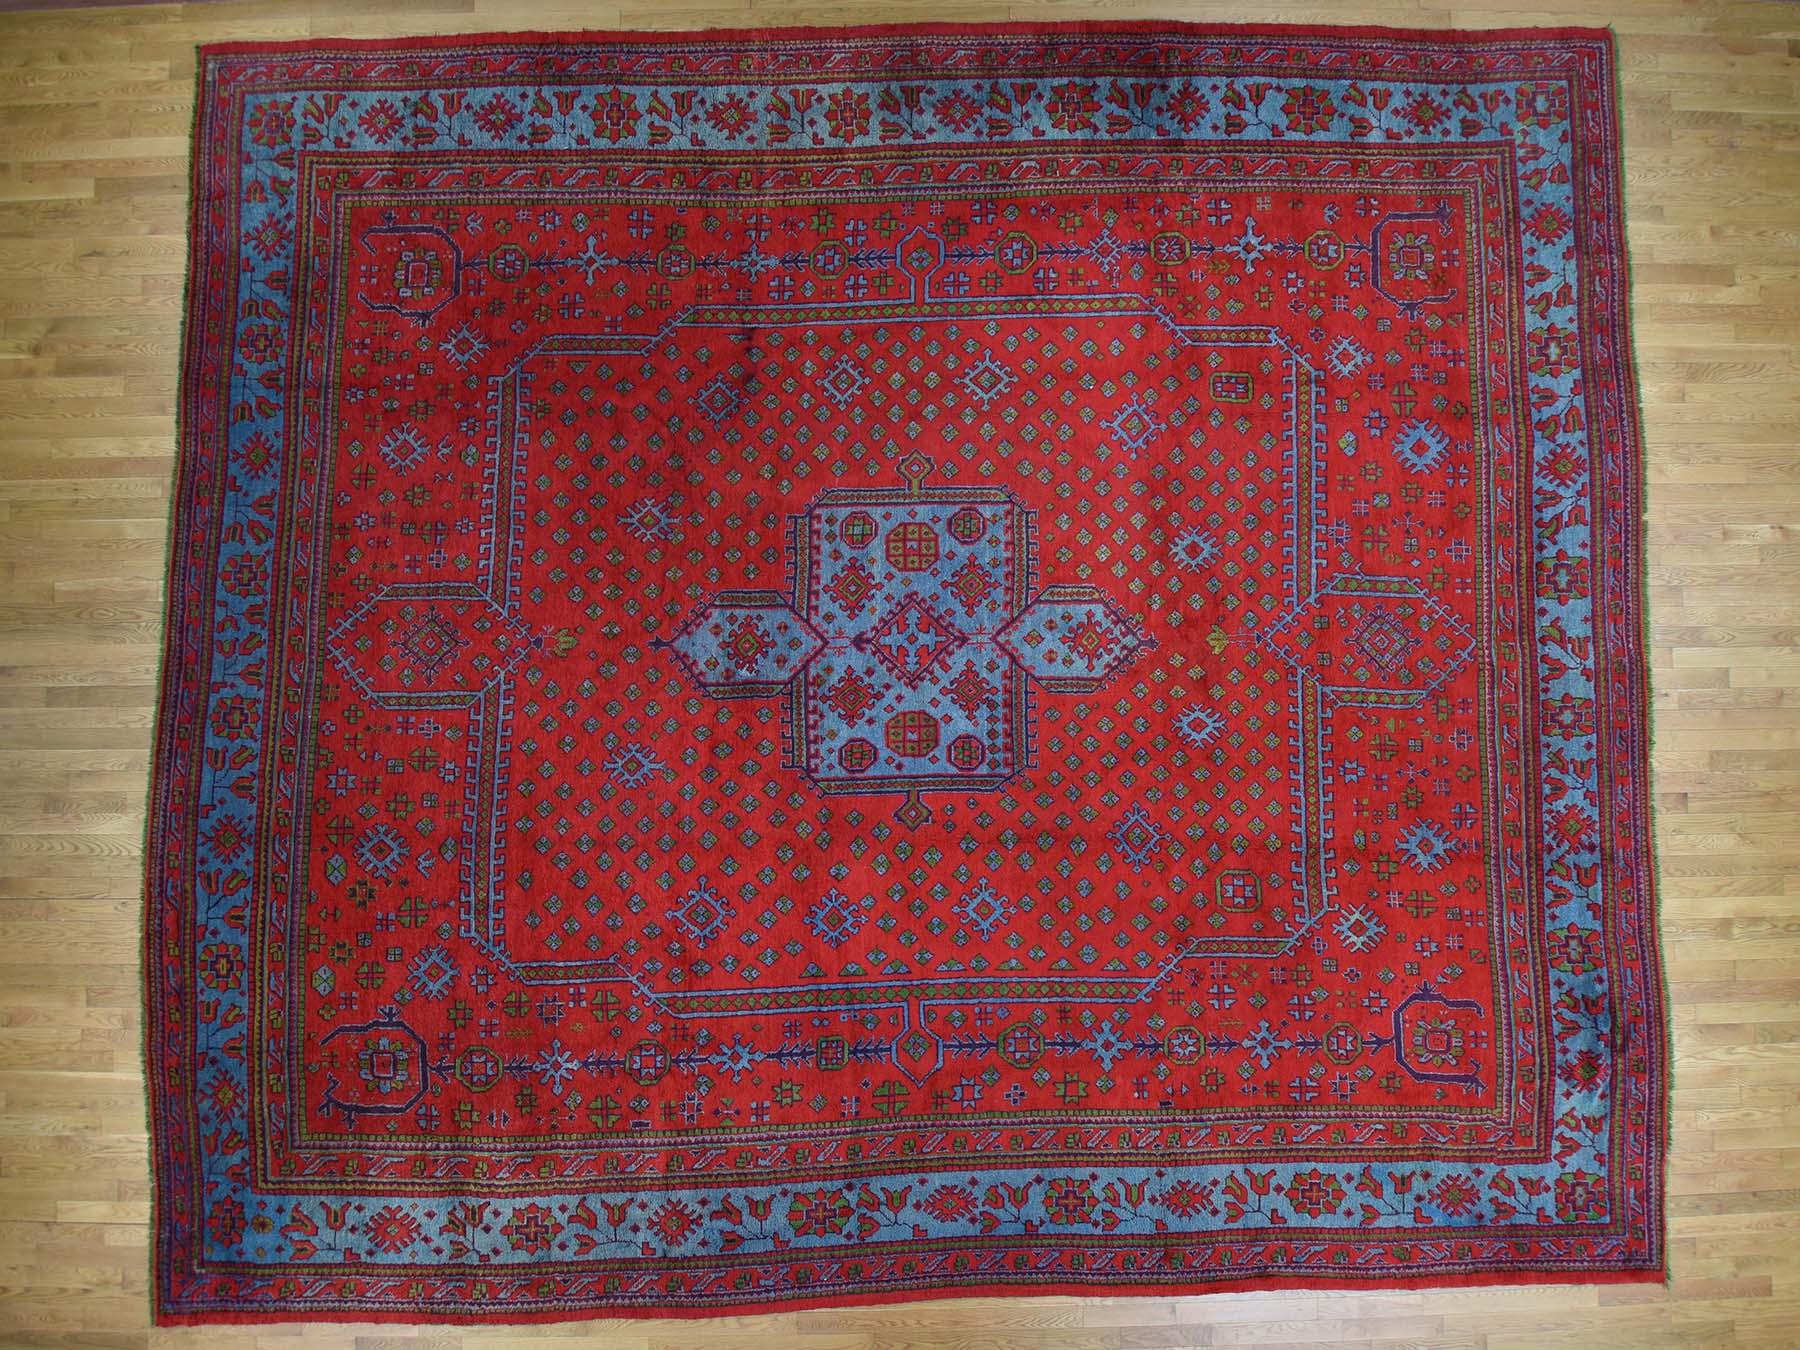 This is a genuine hand knotted oriental rug. It is not hand tufted or machine made rug. Our entire inventory is made of either hand knotted or handwoven rugs.

Adorn your house style with this splendid antique carpet. This handcrafted Turkish